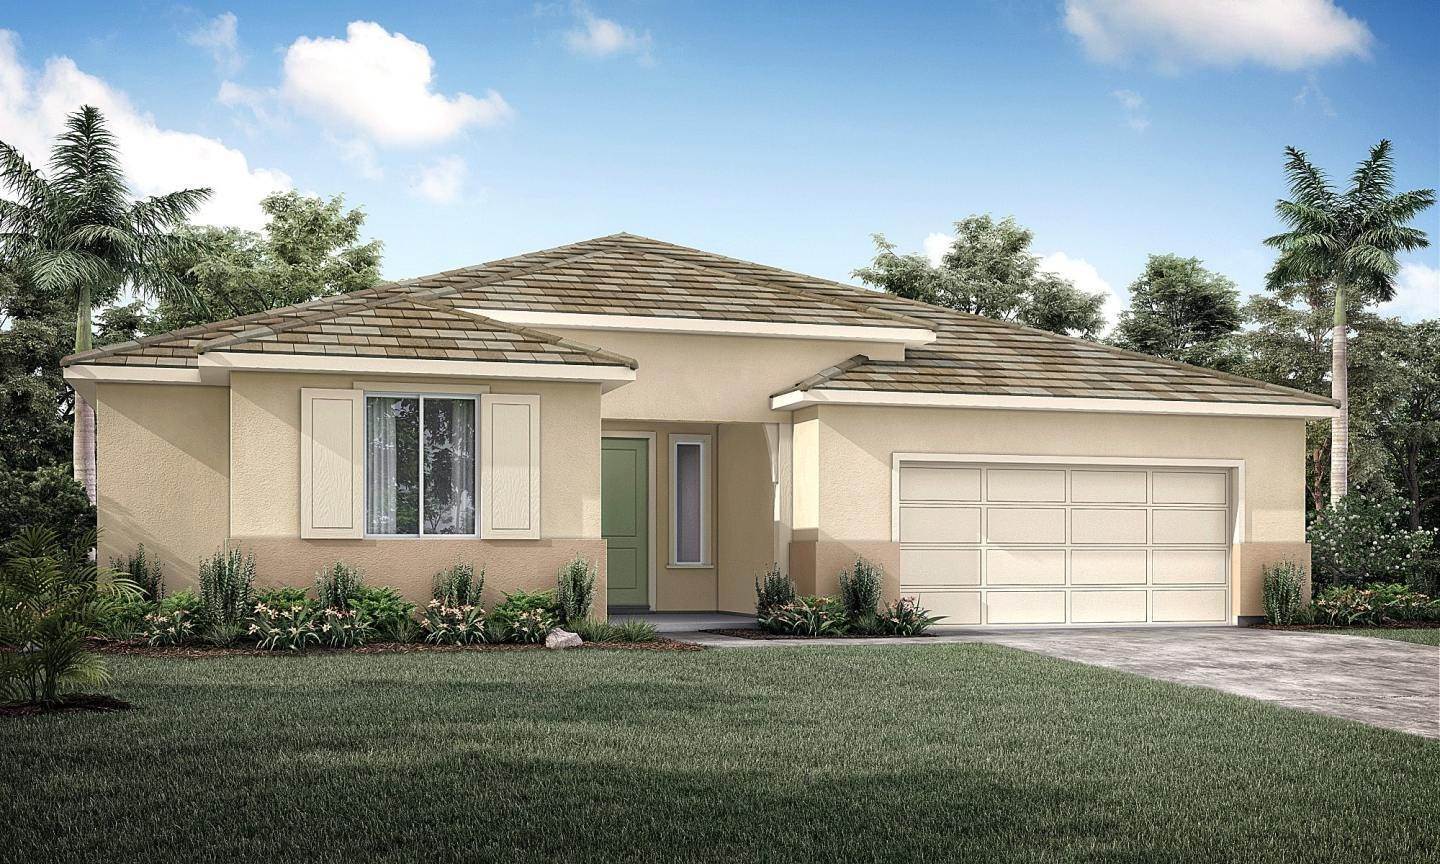 Single Family for Sale at Ella Gardens - The West Garden - The Rosemary 2198 N Mitchell St. HANFORD, CALIFORNIA 93230 UNITED STATES